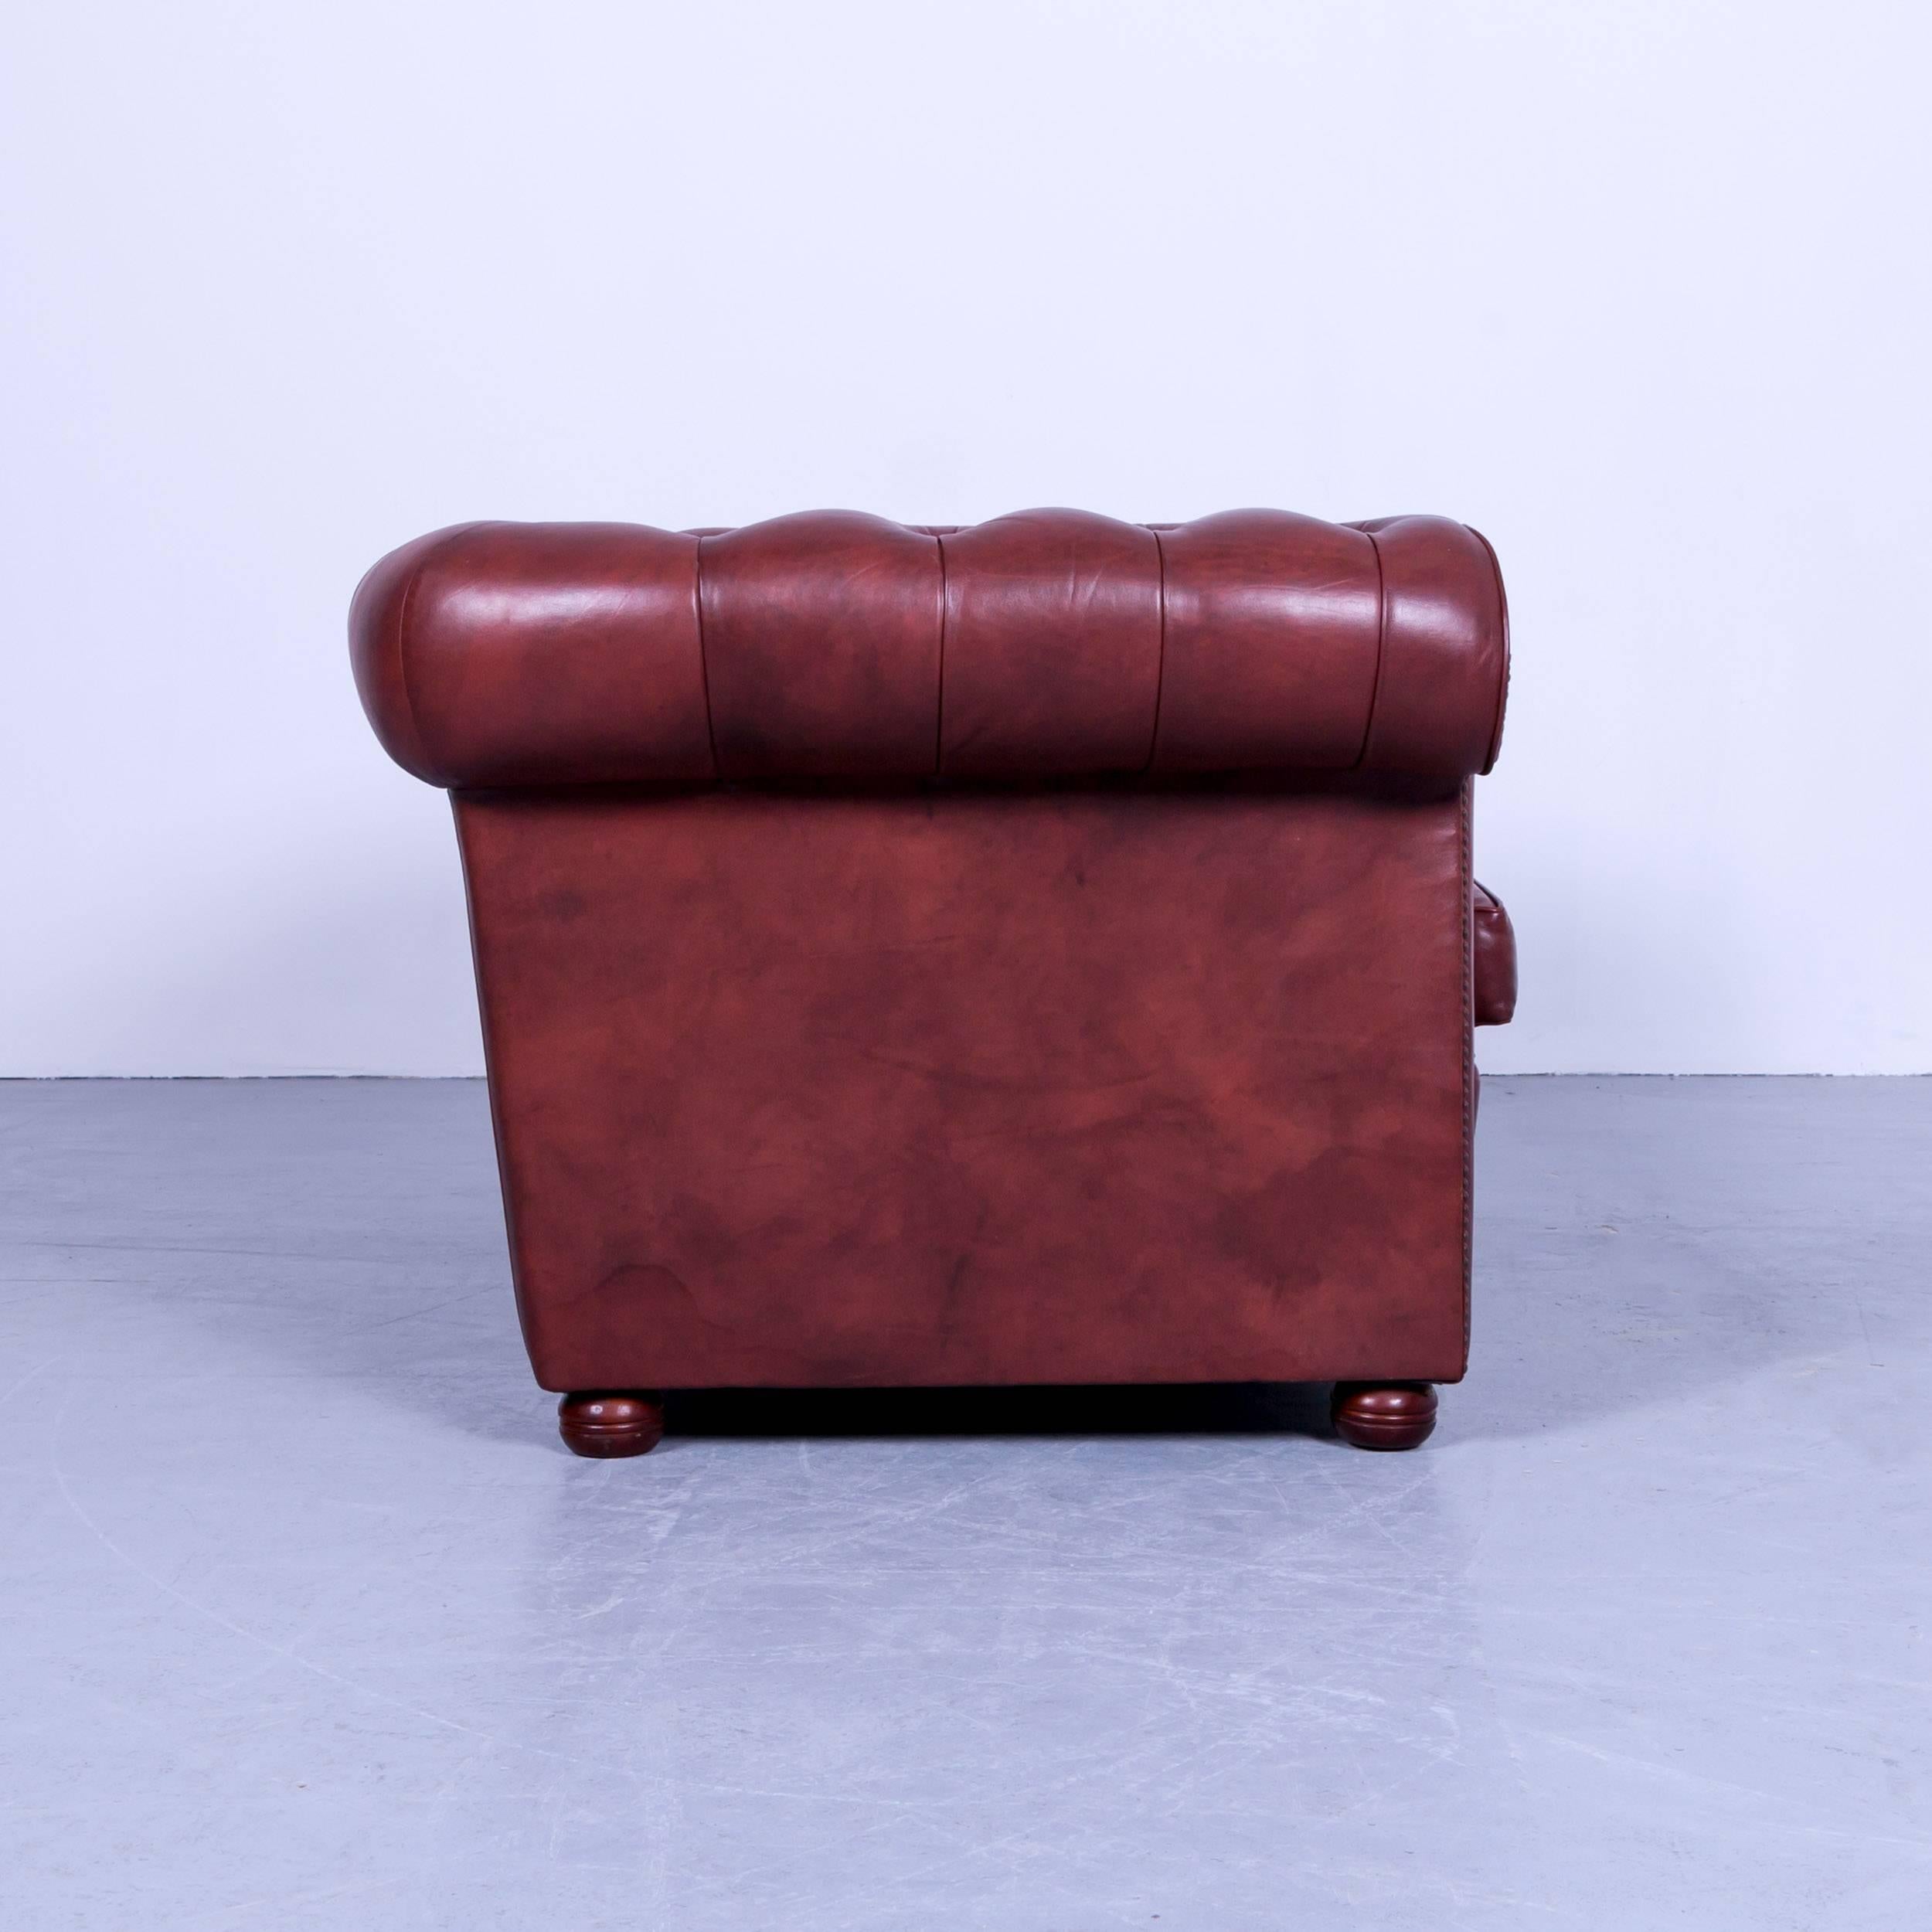 Leather Chesterfield Two-Seat Sofa Red Brown Vintage Retro Handmade Rivets